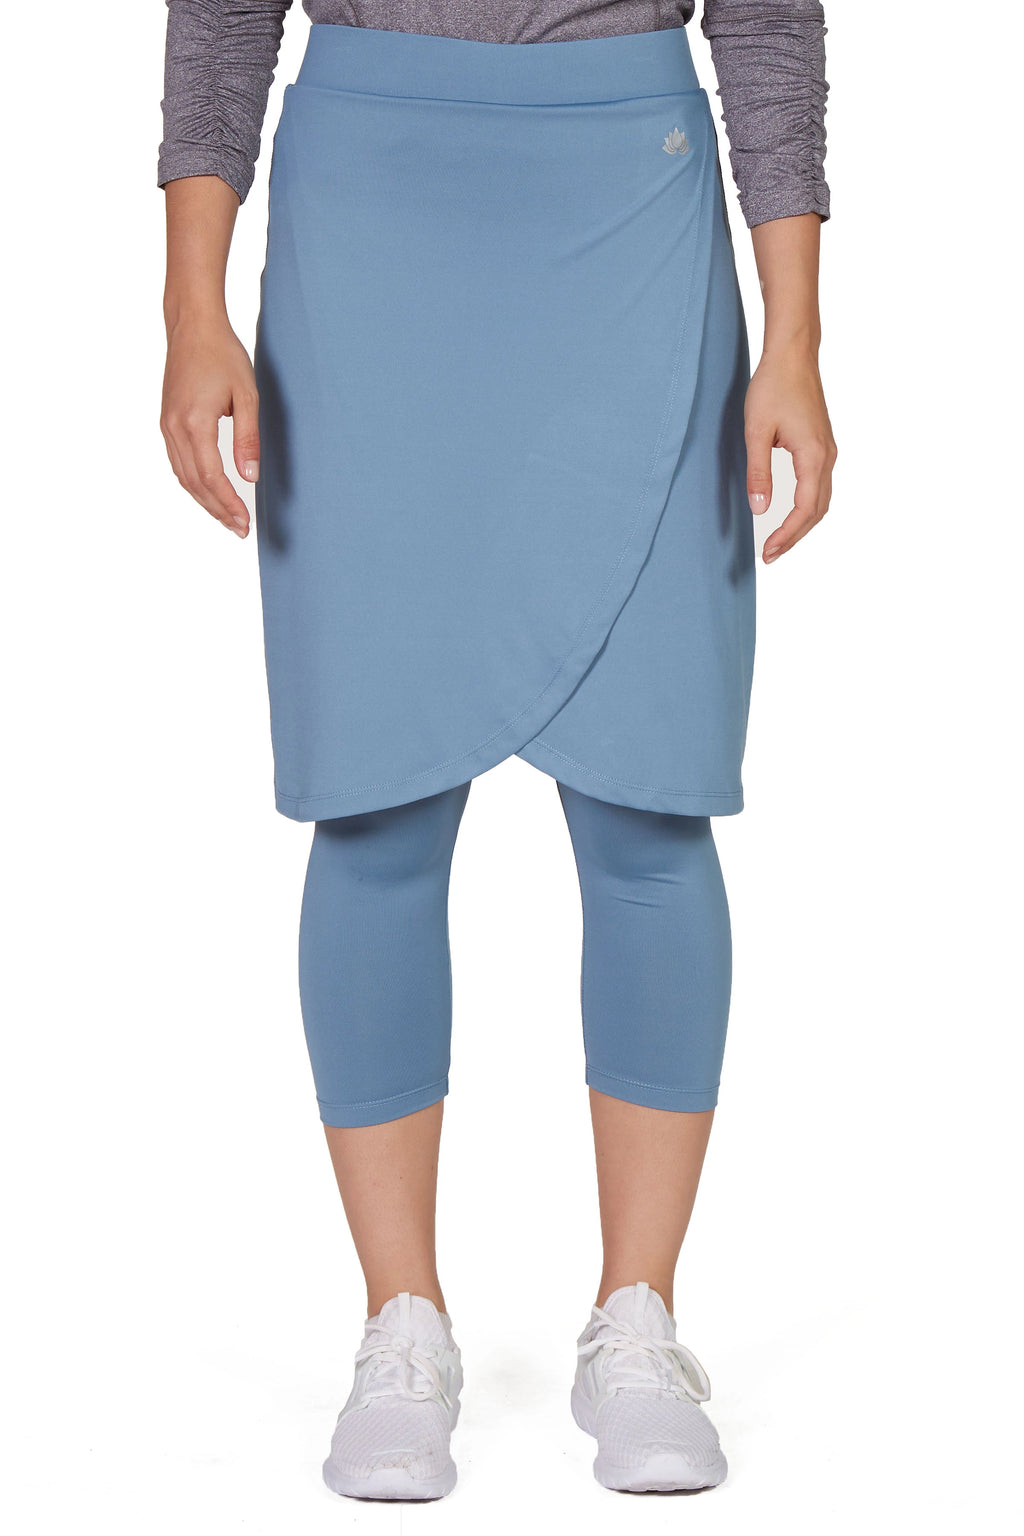 Snoga Athletics M8-BLU-XS Faux Wrap Skirt With Attached Legging